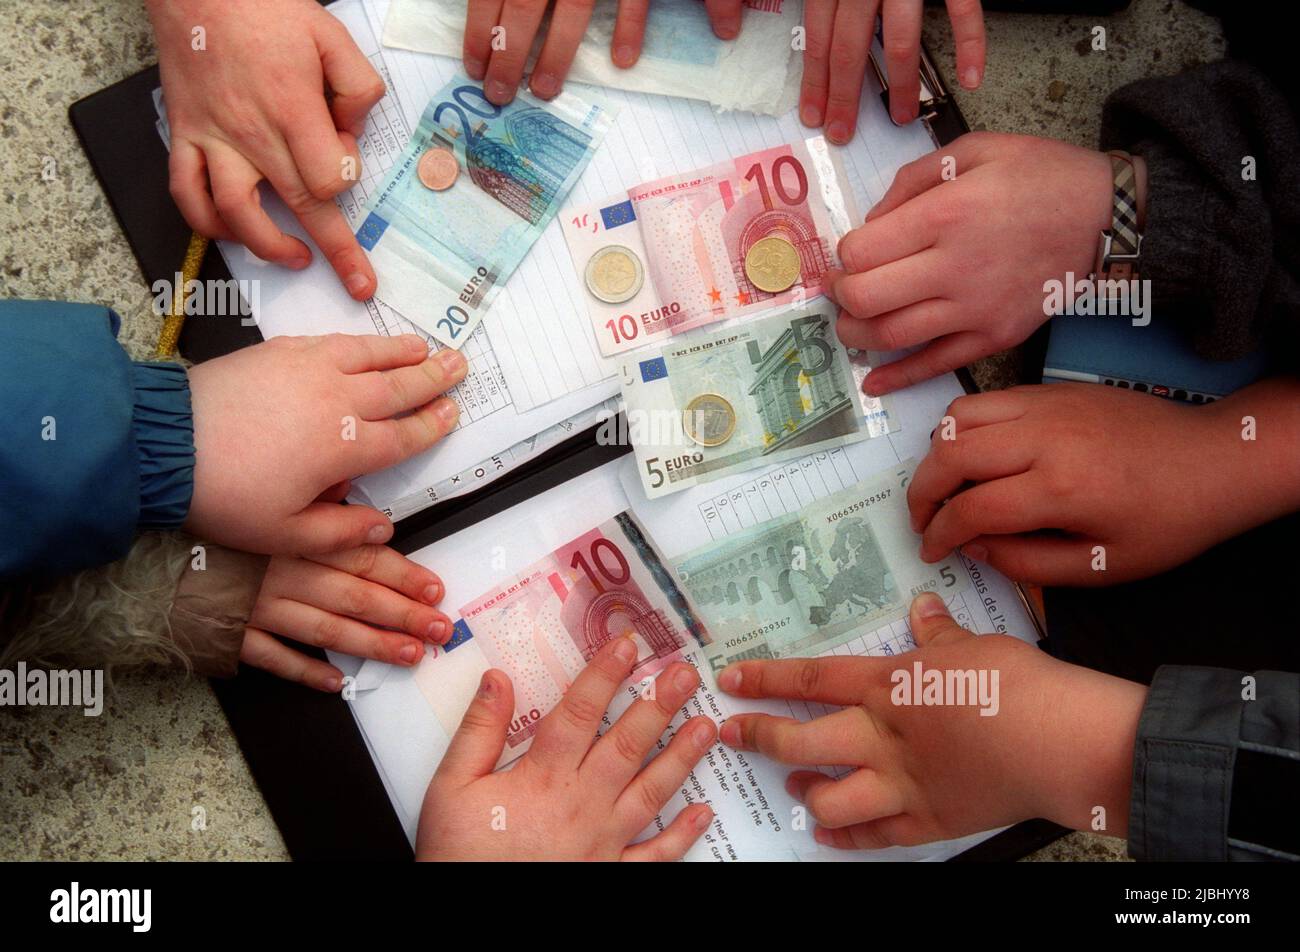 childrens hands playing with Euro notes and bills Stock Photo